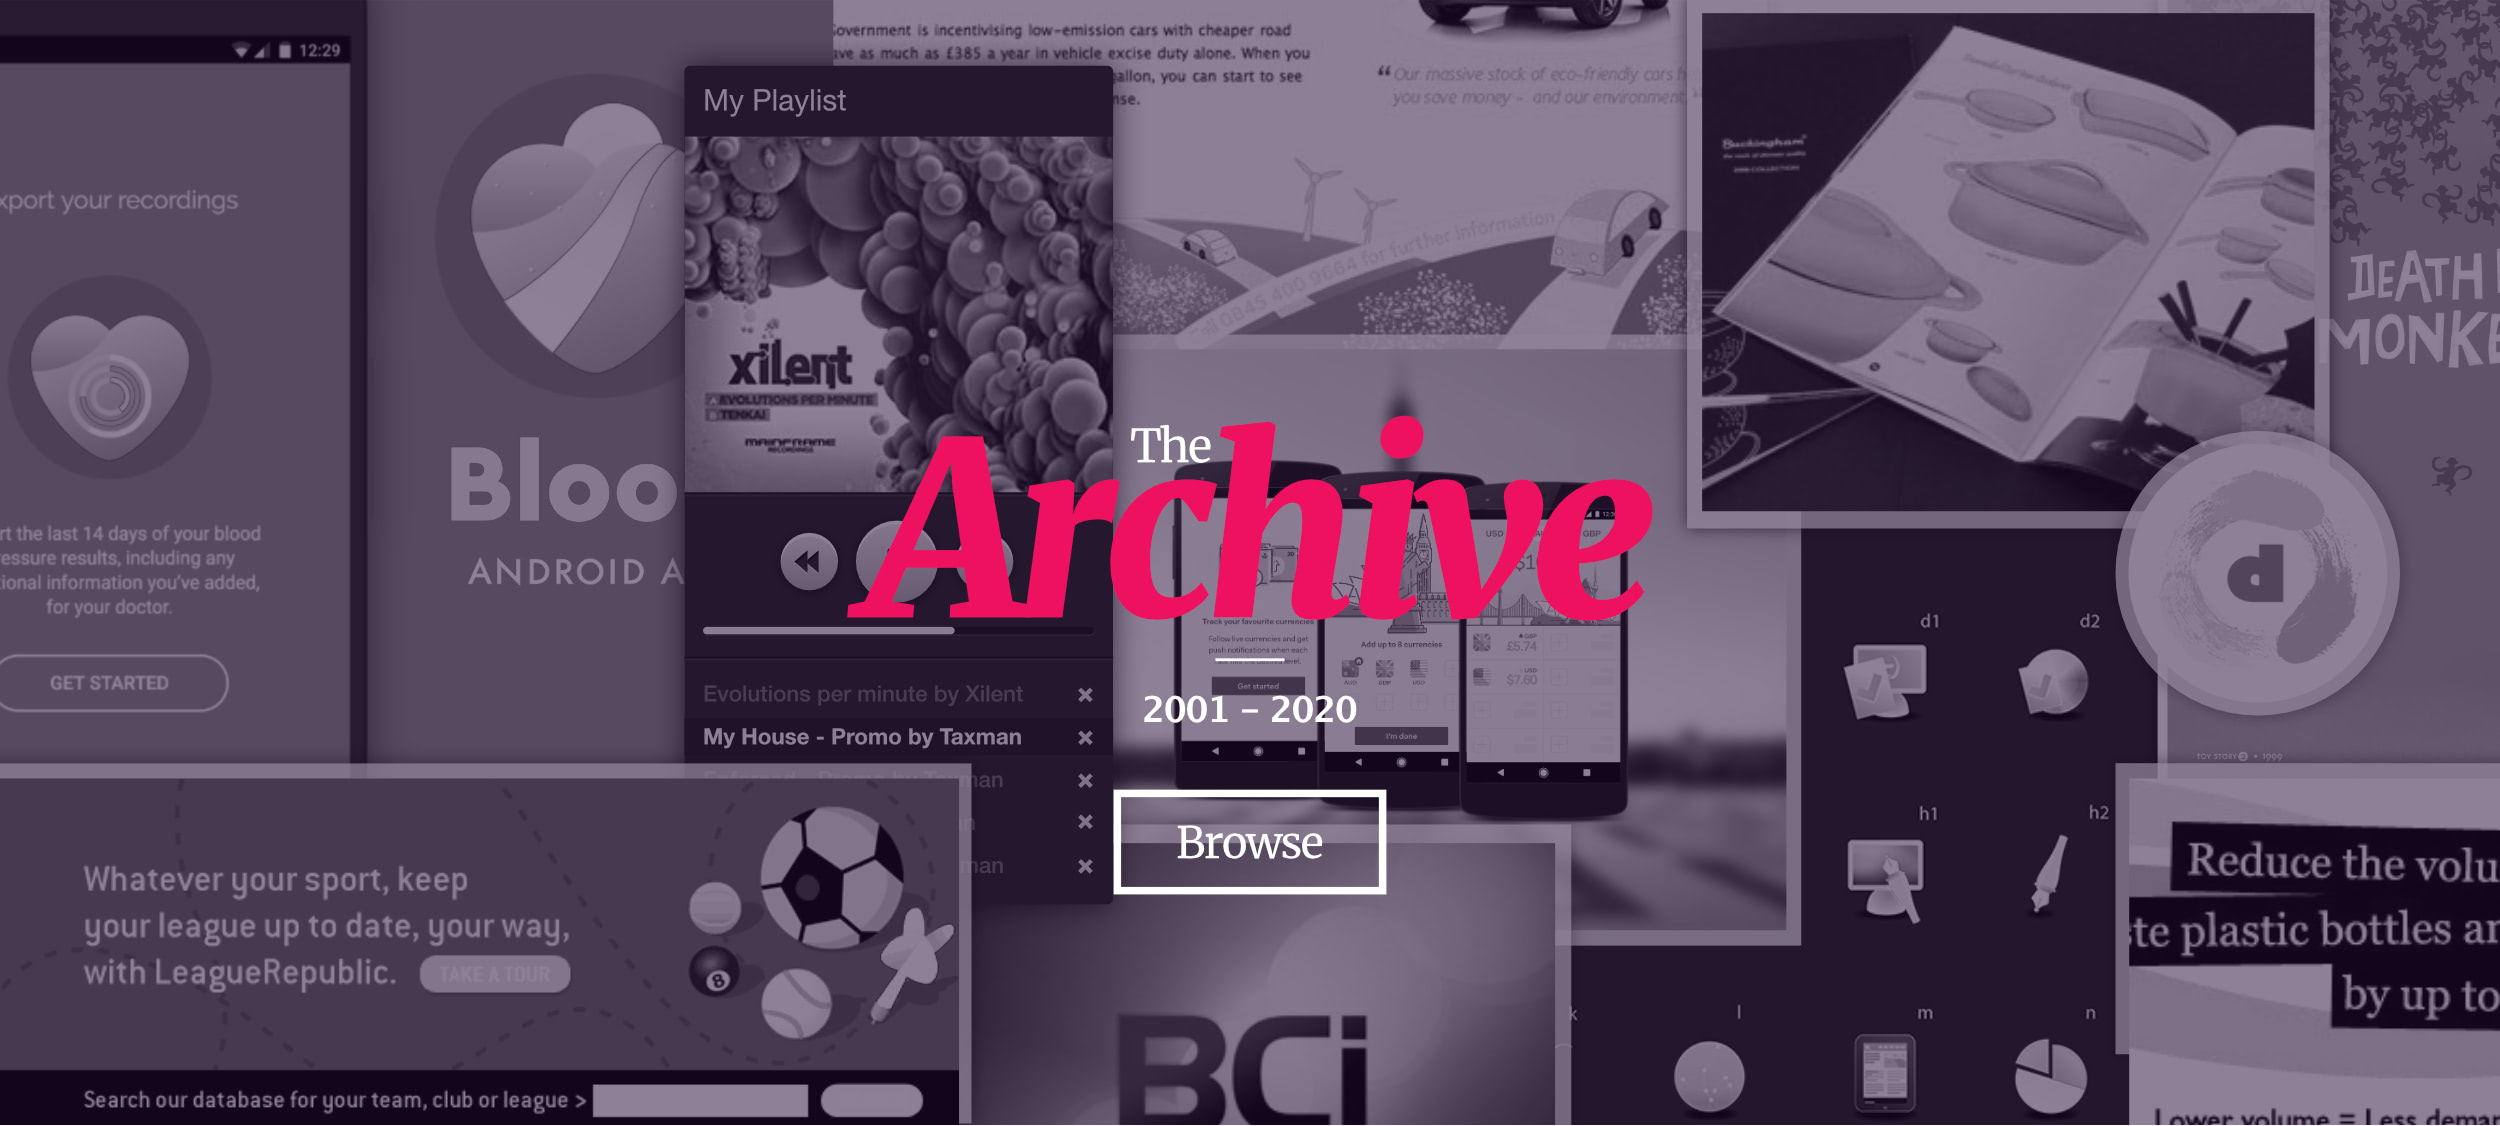 The Archive, 2001 to 2010.